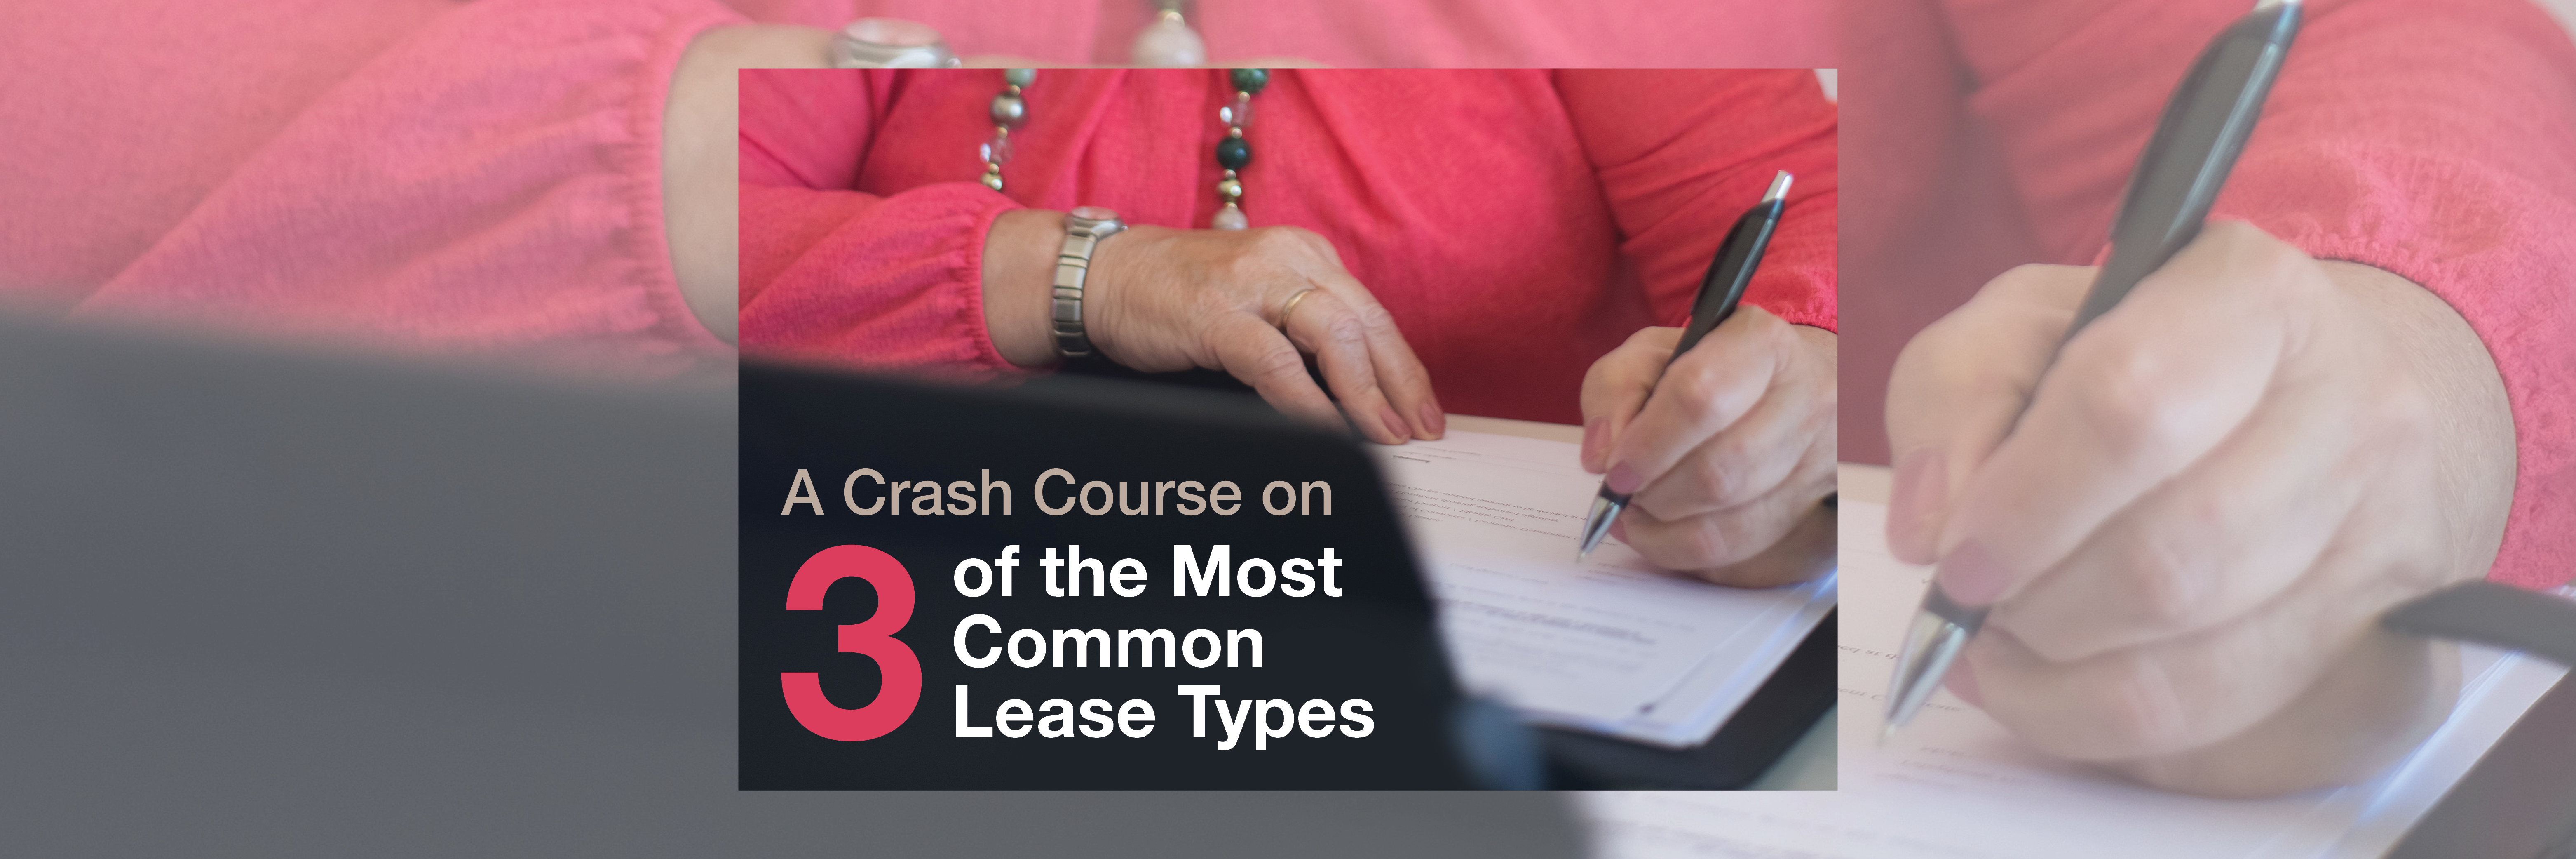 A Crash Course on 3 of the Most Common Lease Types